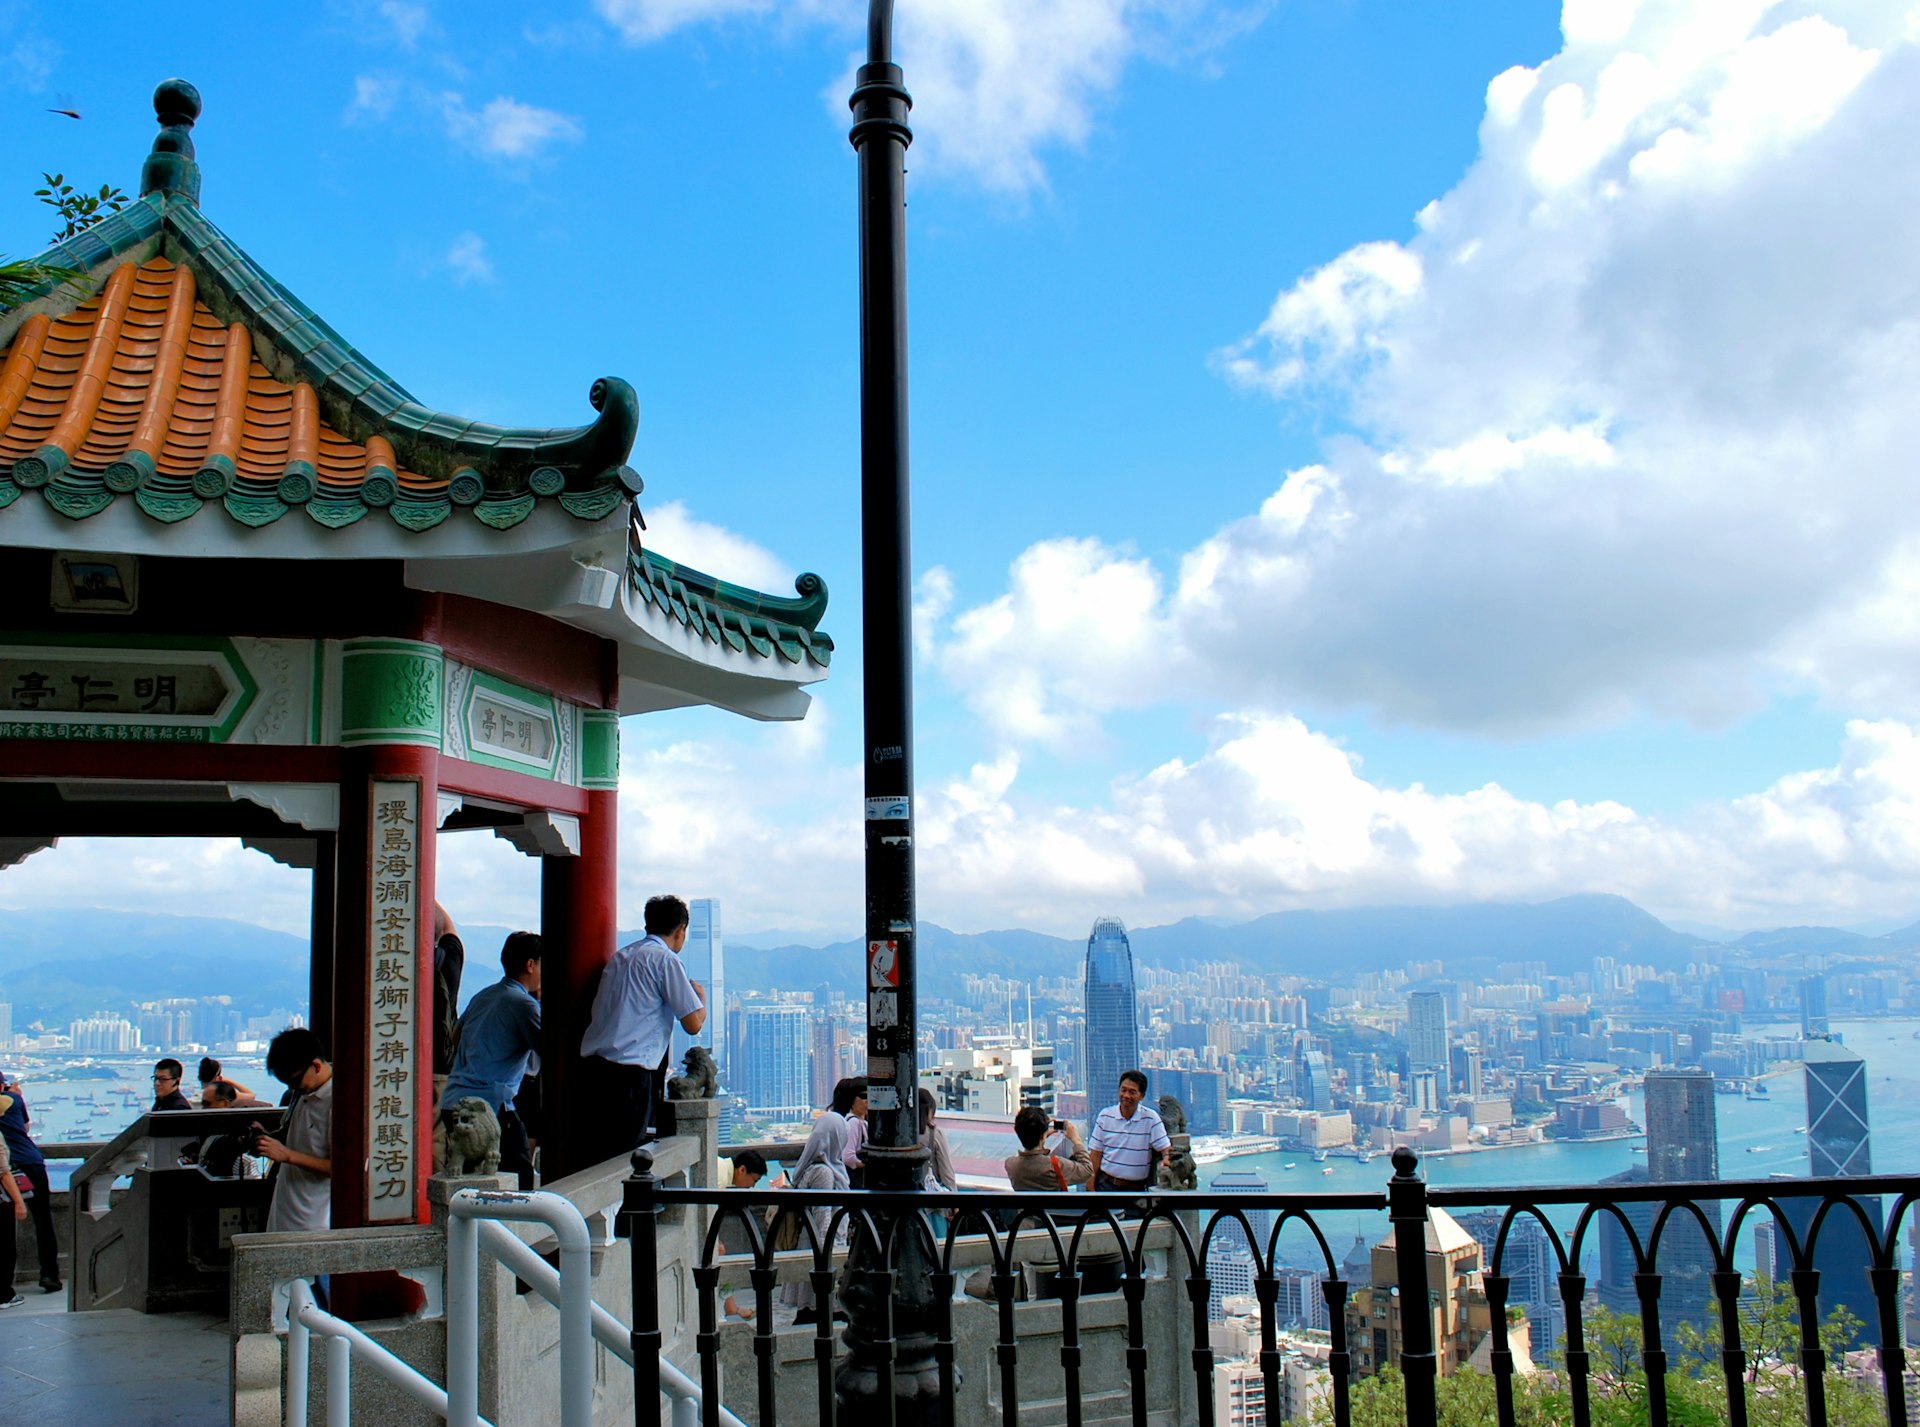 People pose for photos at the viewpoint of Victoria Peak, with high-rise Hong Kong buildings behind them